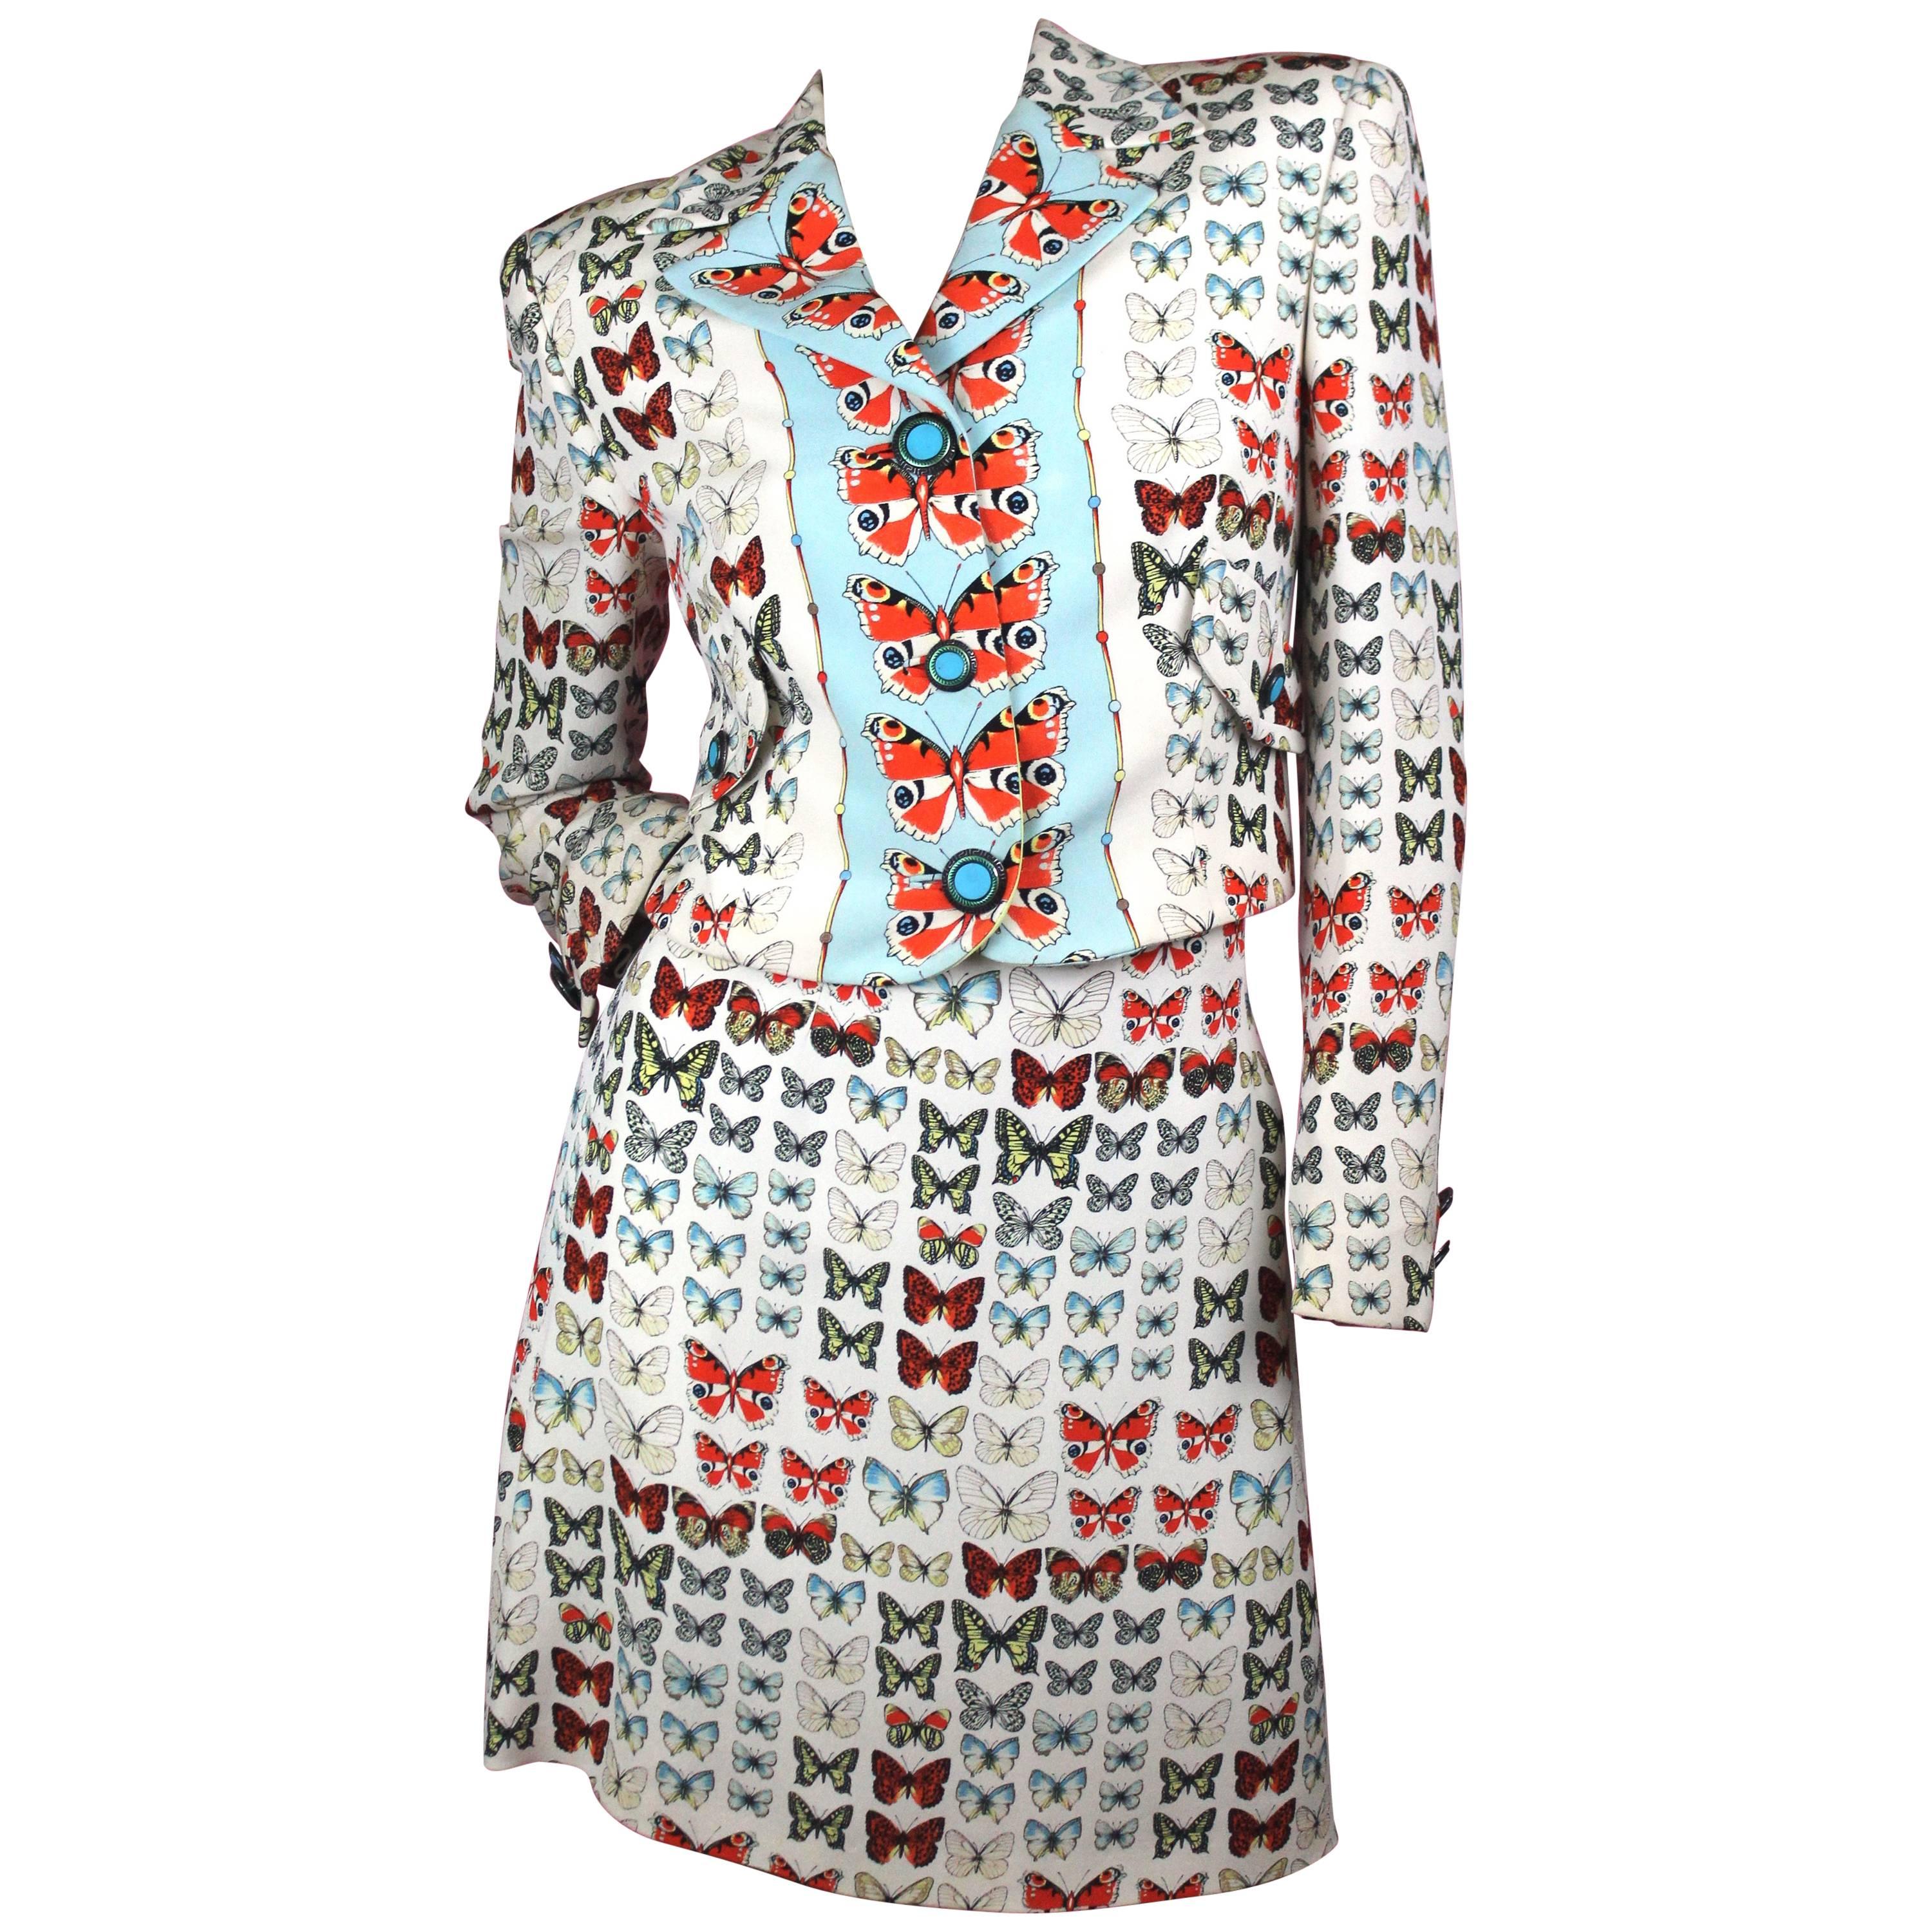 Gianni Versace Spring Summer 1995 Butterfly Print Skirt Suit Size IT 42 / US 6 For Sale